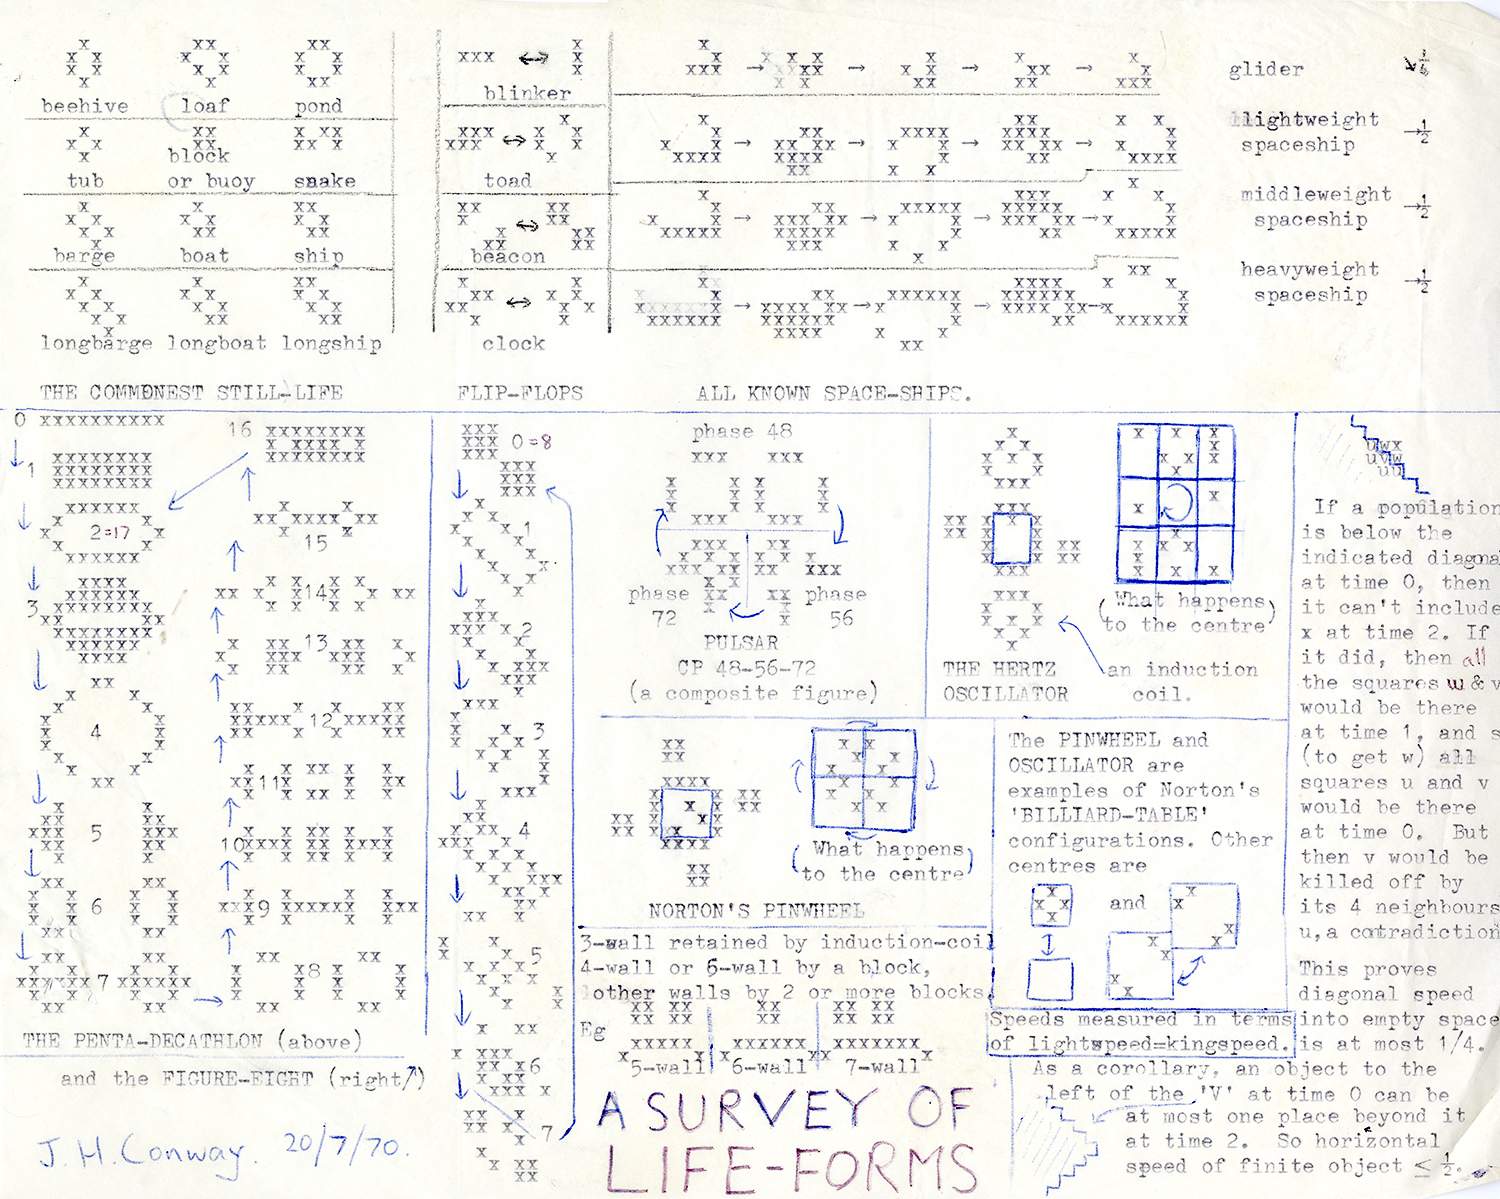 John Conway, A Survey of Life-Forms, Game of Life, 1970